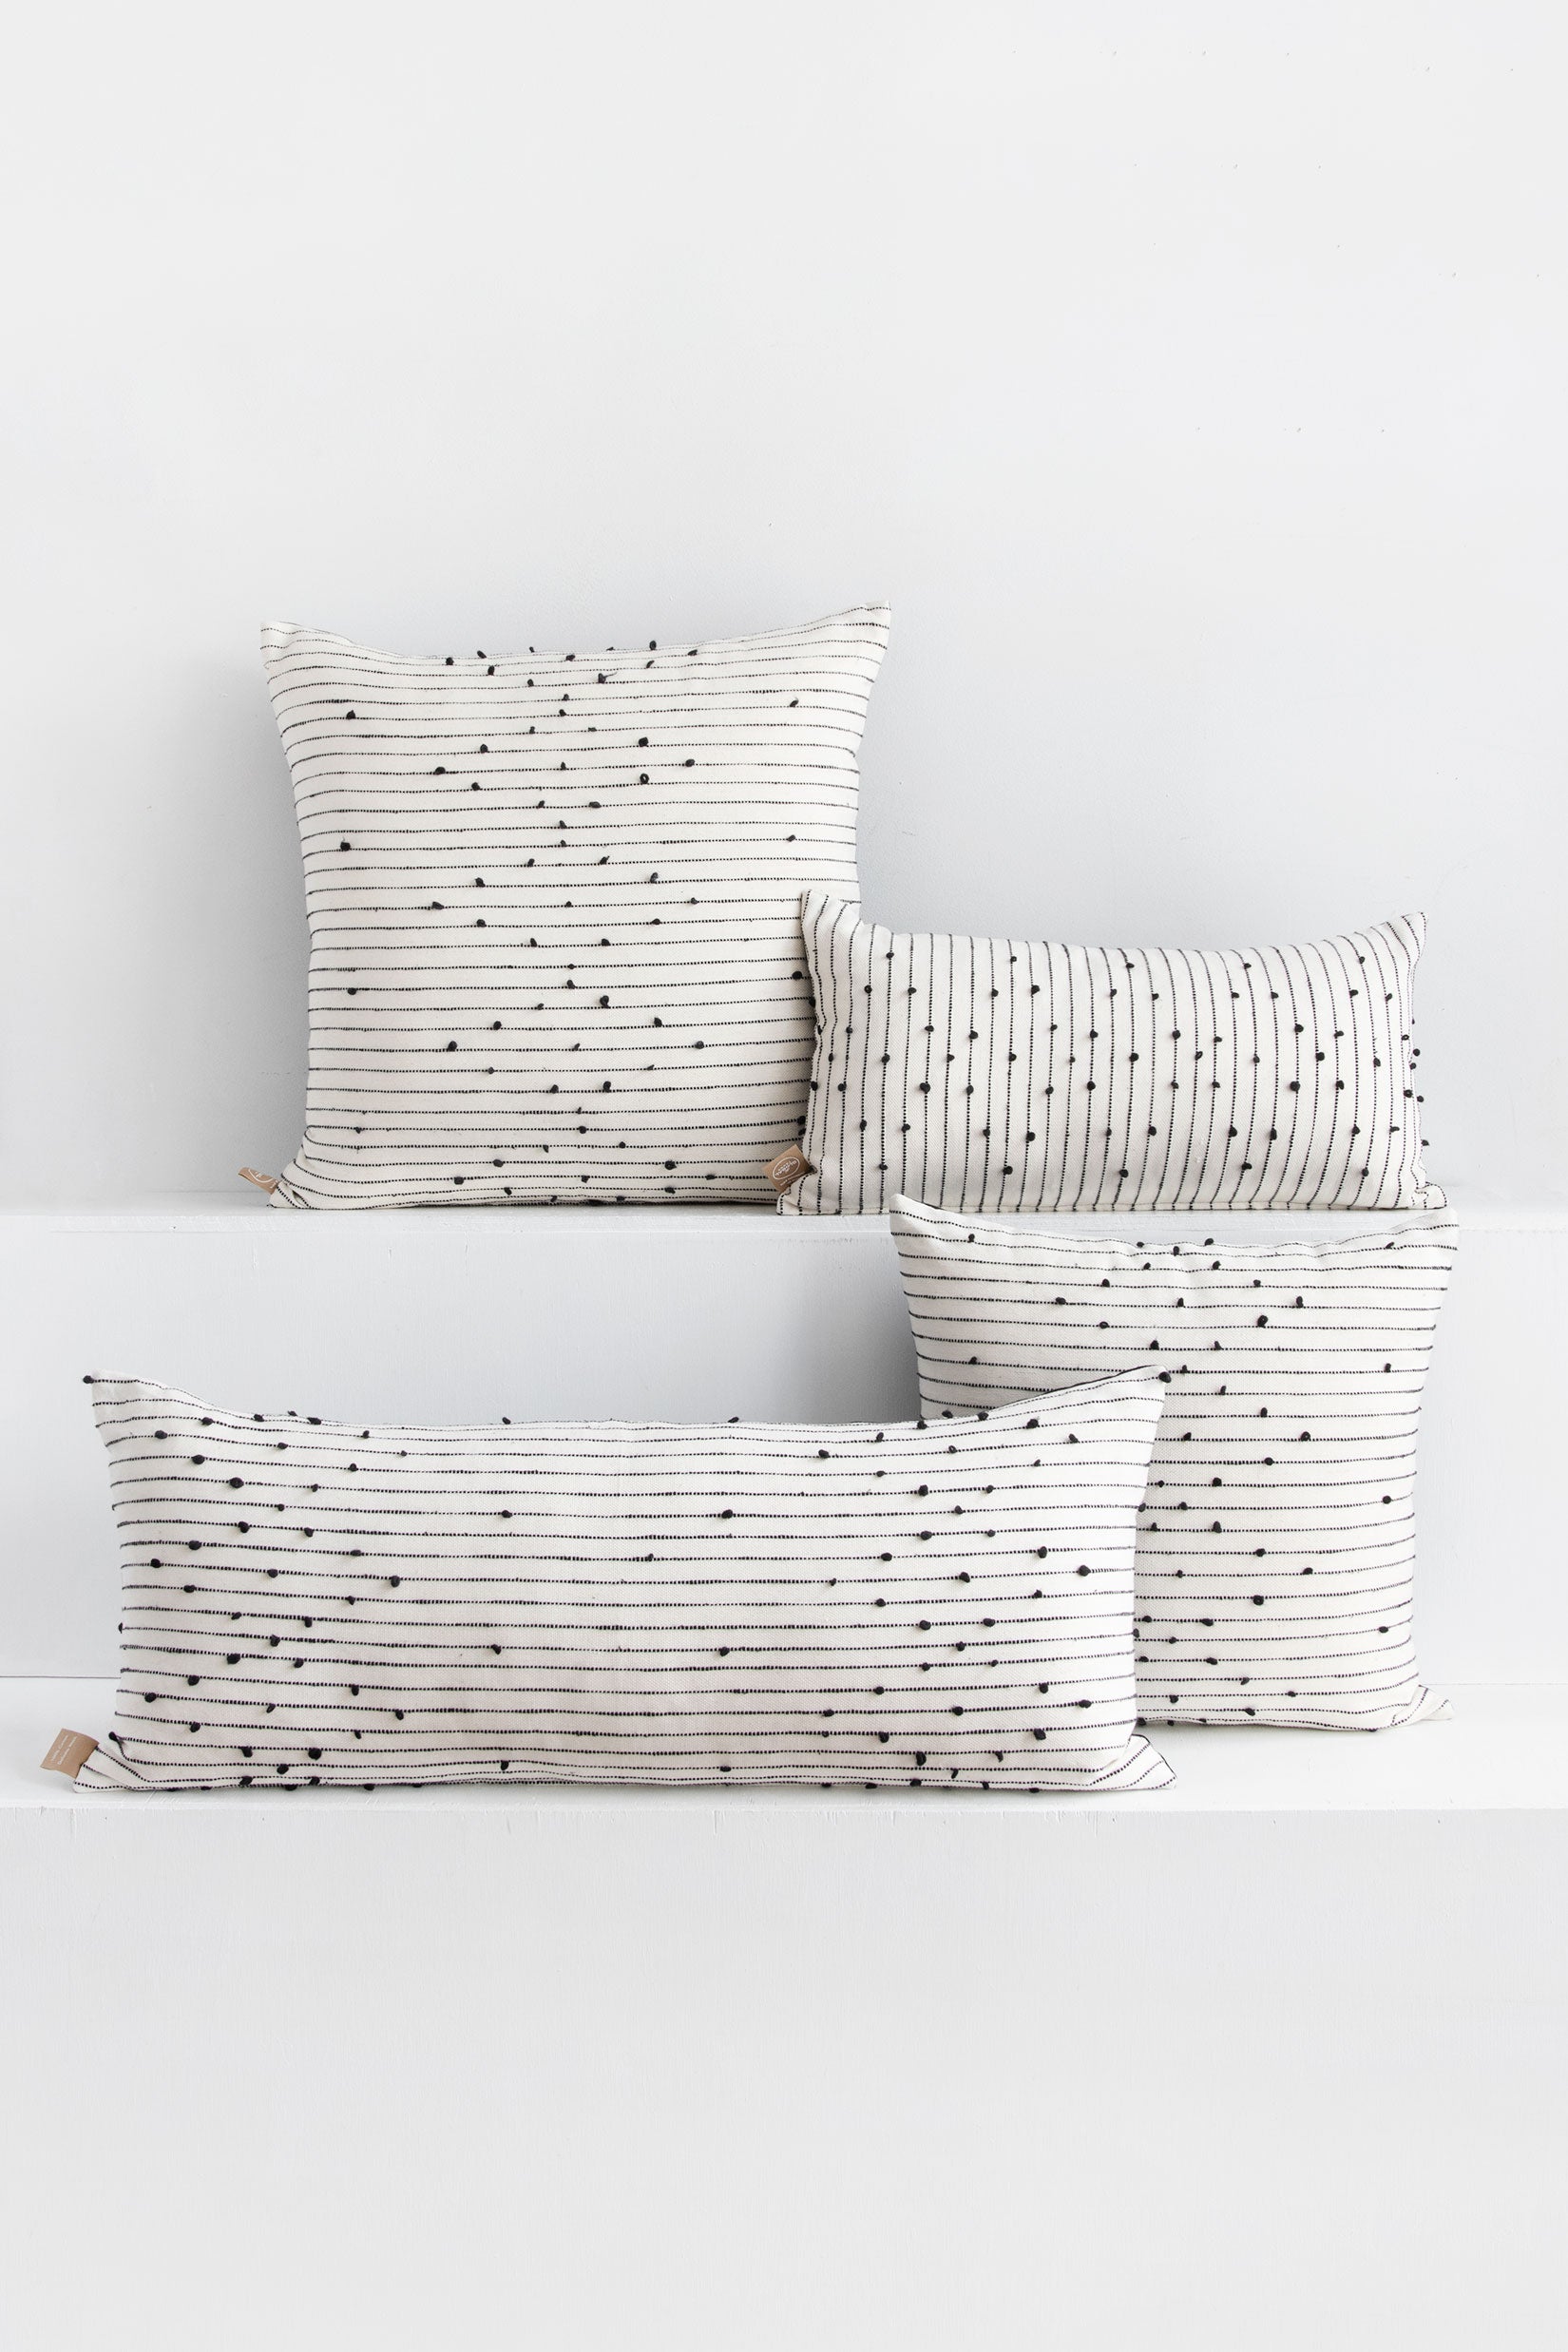 Four tight-woven white pillows in different shapes and sizes with small black pom poms arranged in a repeating diamond pattern arranged along black lines stretching across the pillows.